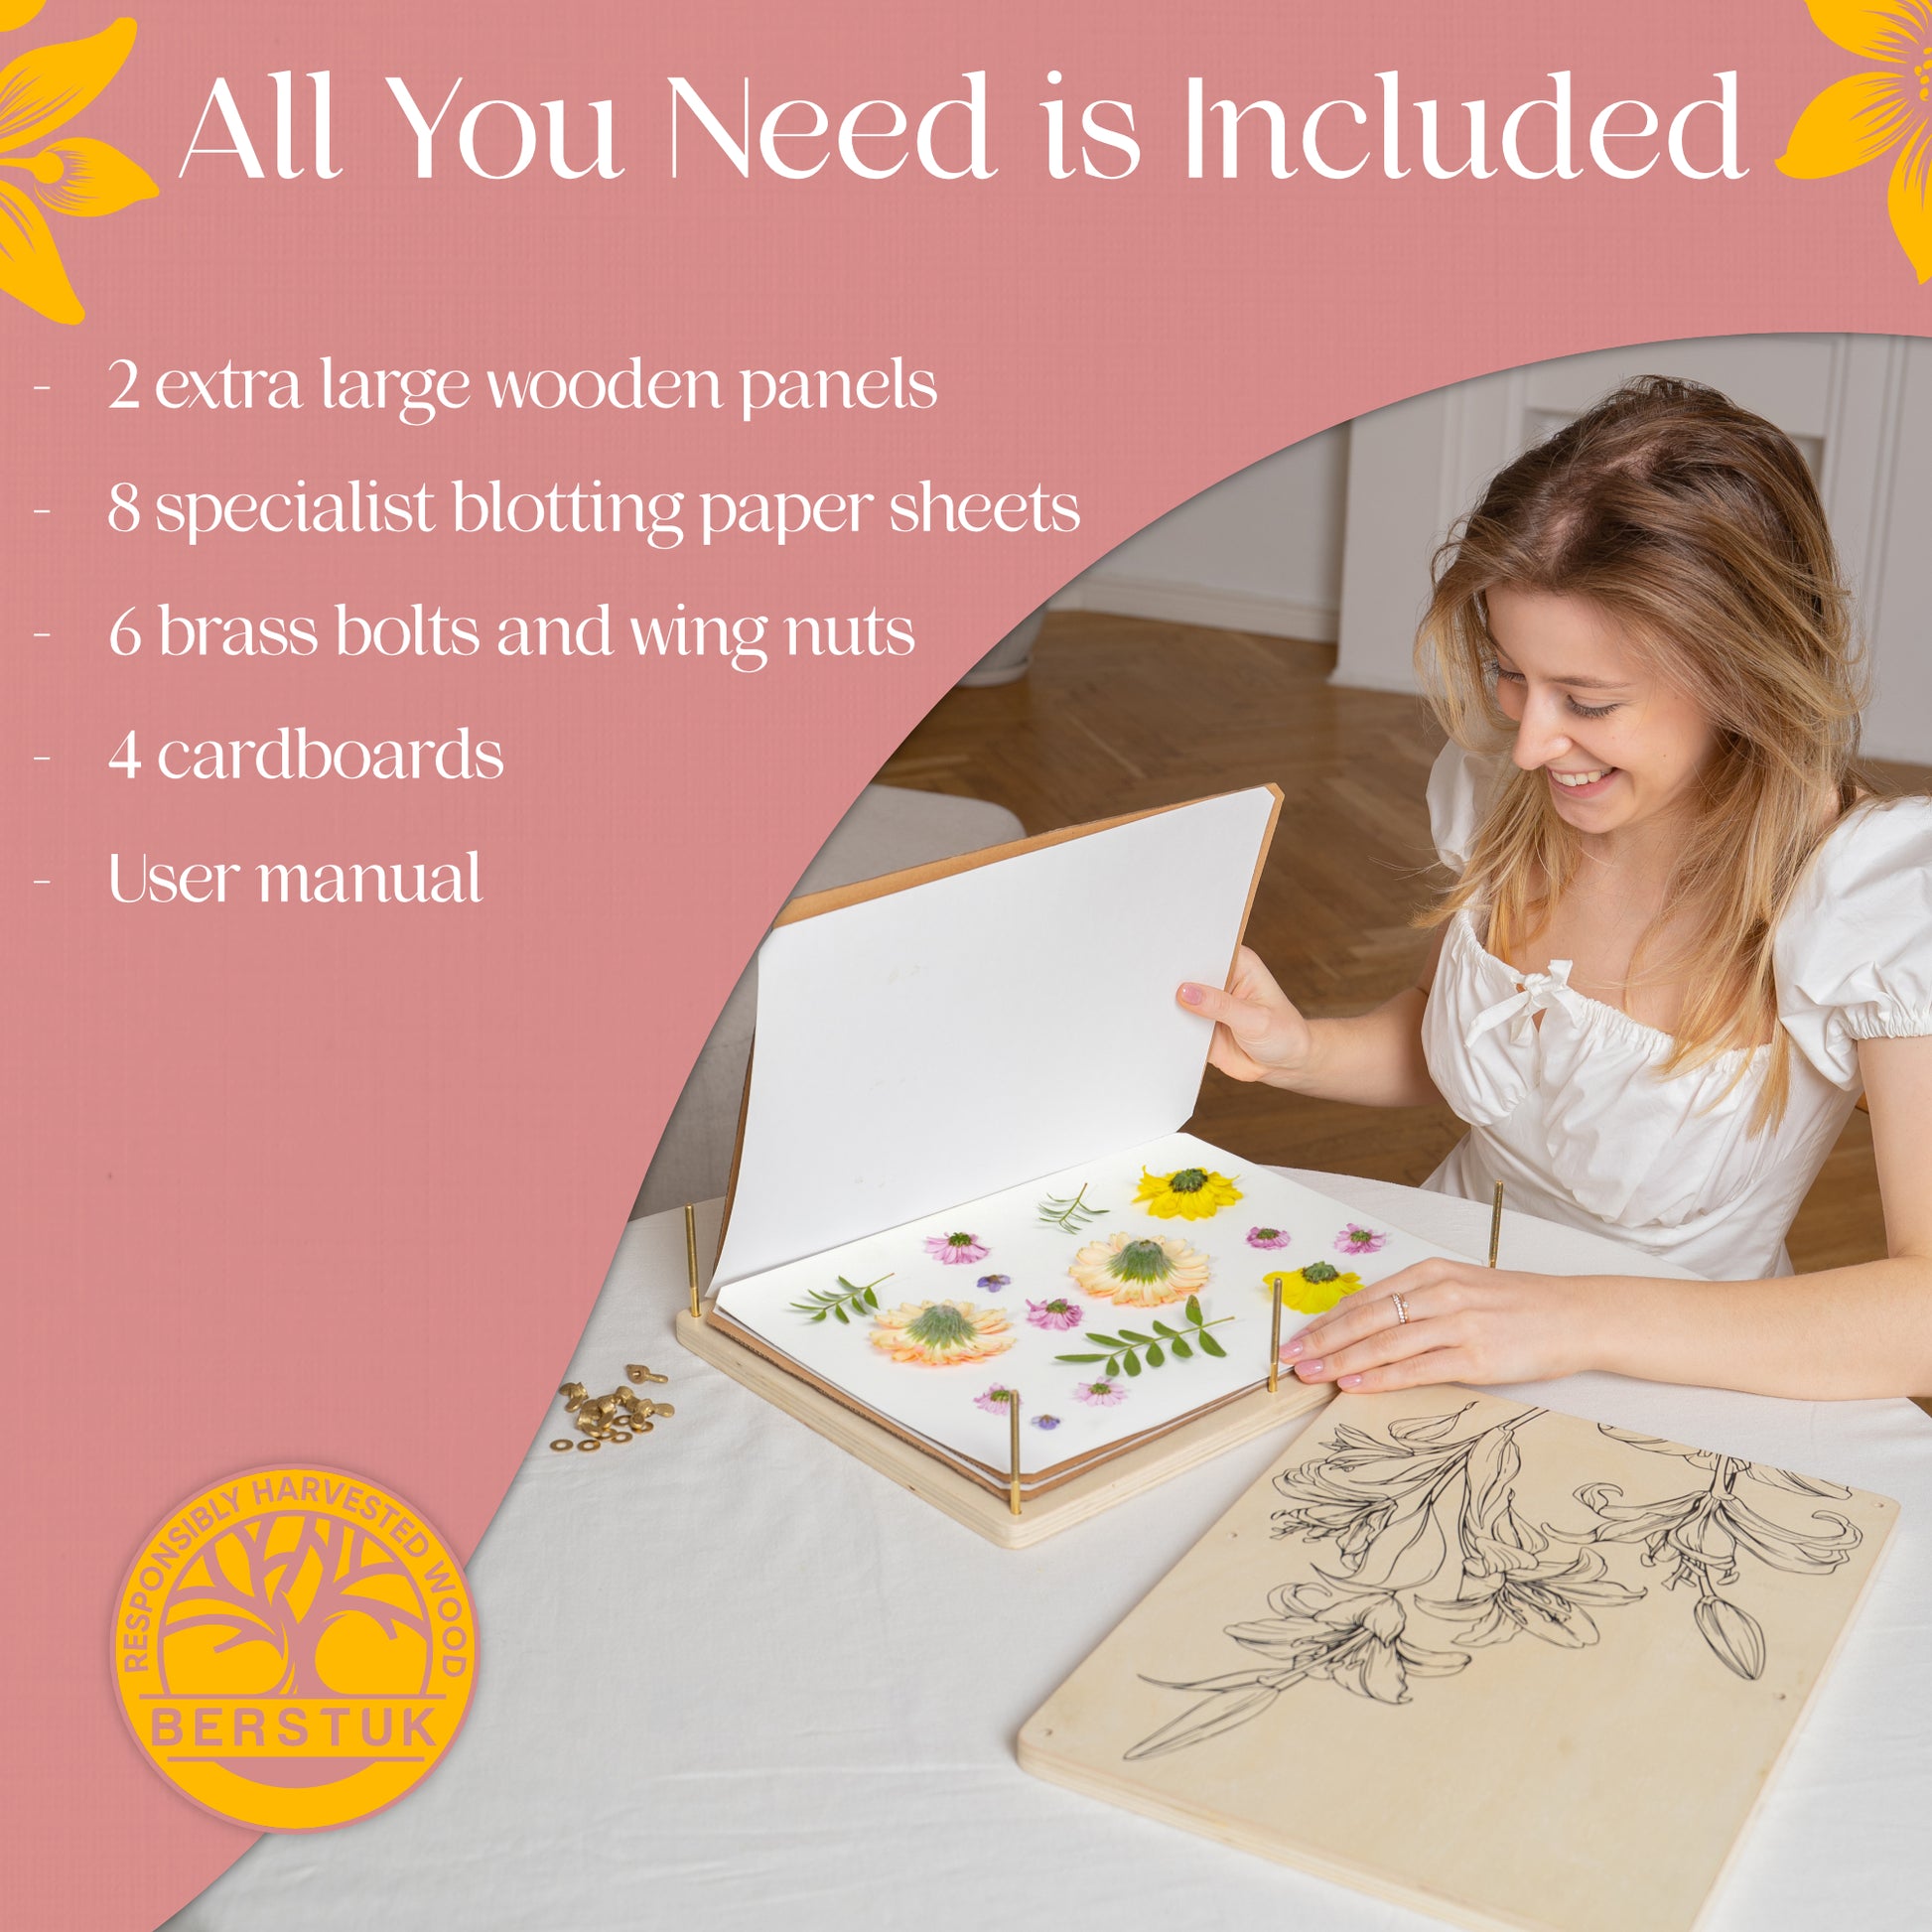 Berstuk Miniature Flower Press Kit for Adults - The Tiny Flower Preservation Kit Includes Two 3 x 3 Presses - Ideal Gift Fo